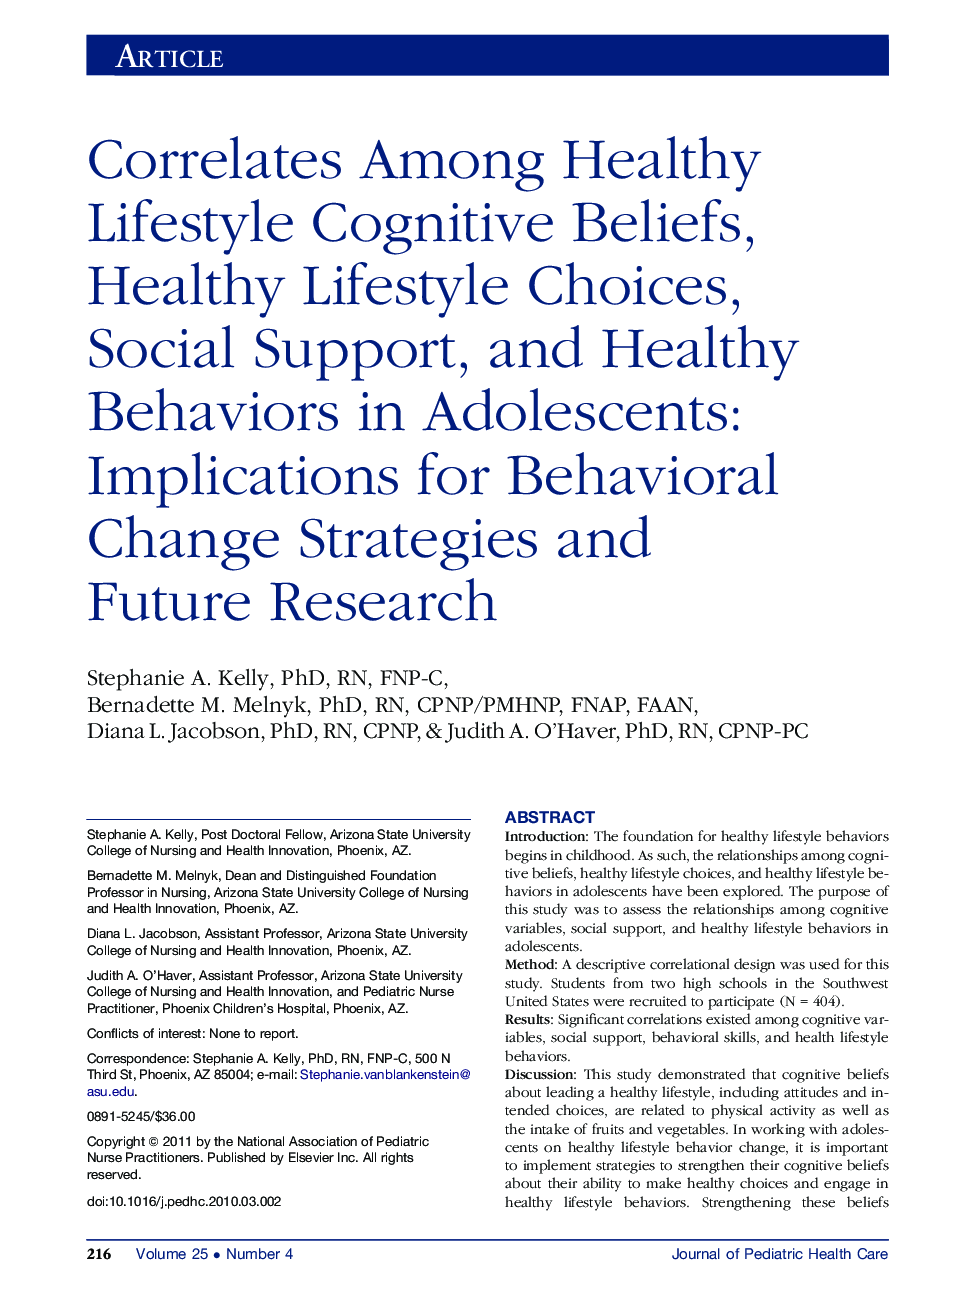 Correlates Among Healthy Lifestyle Cognitive Beliefs, Healthy Lifestyle Choices, Social Support, and Healthy Behaviors in Adolescents: Implications for Behavioral Change Strategies and Future Research 